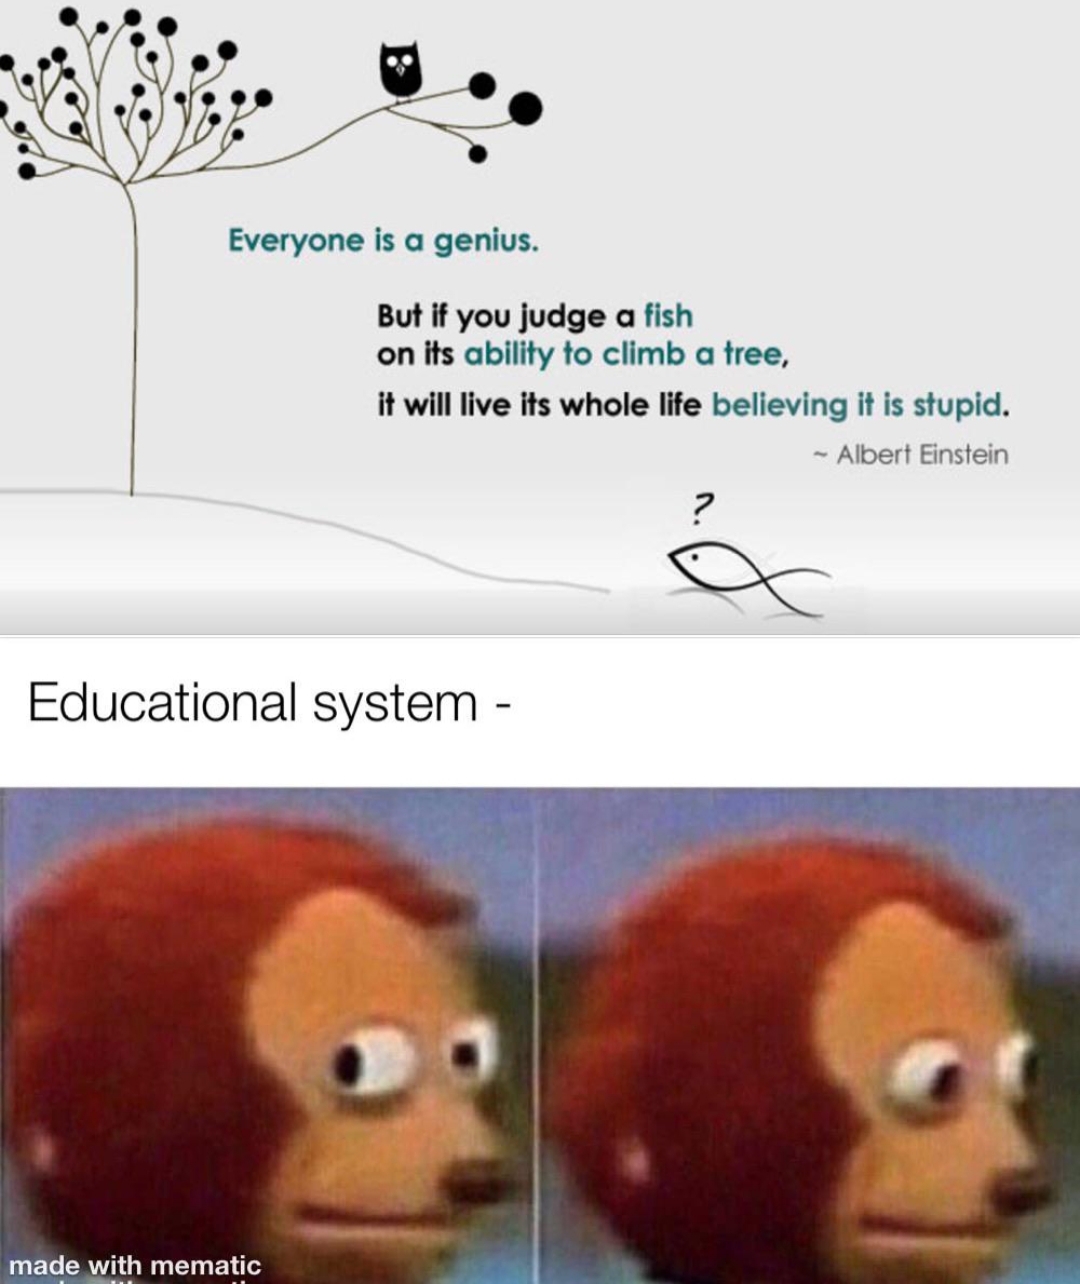 halsey chainsmokers meme - Everyone is a genius. But if you judge a fish on its ability to climb a tree, it will live its whole life believing it is stupid. Albert Einstein Educational system made with mematic